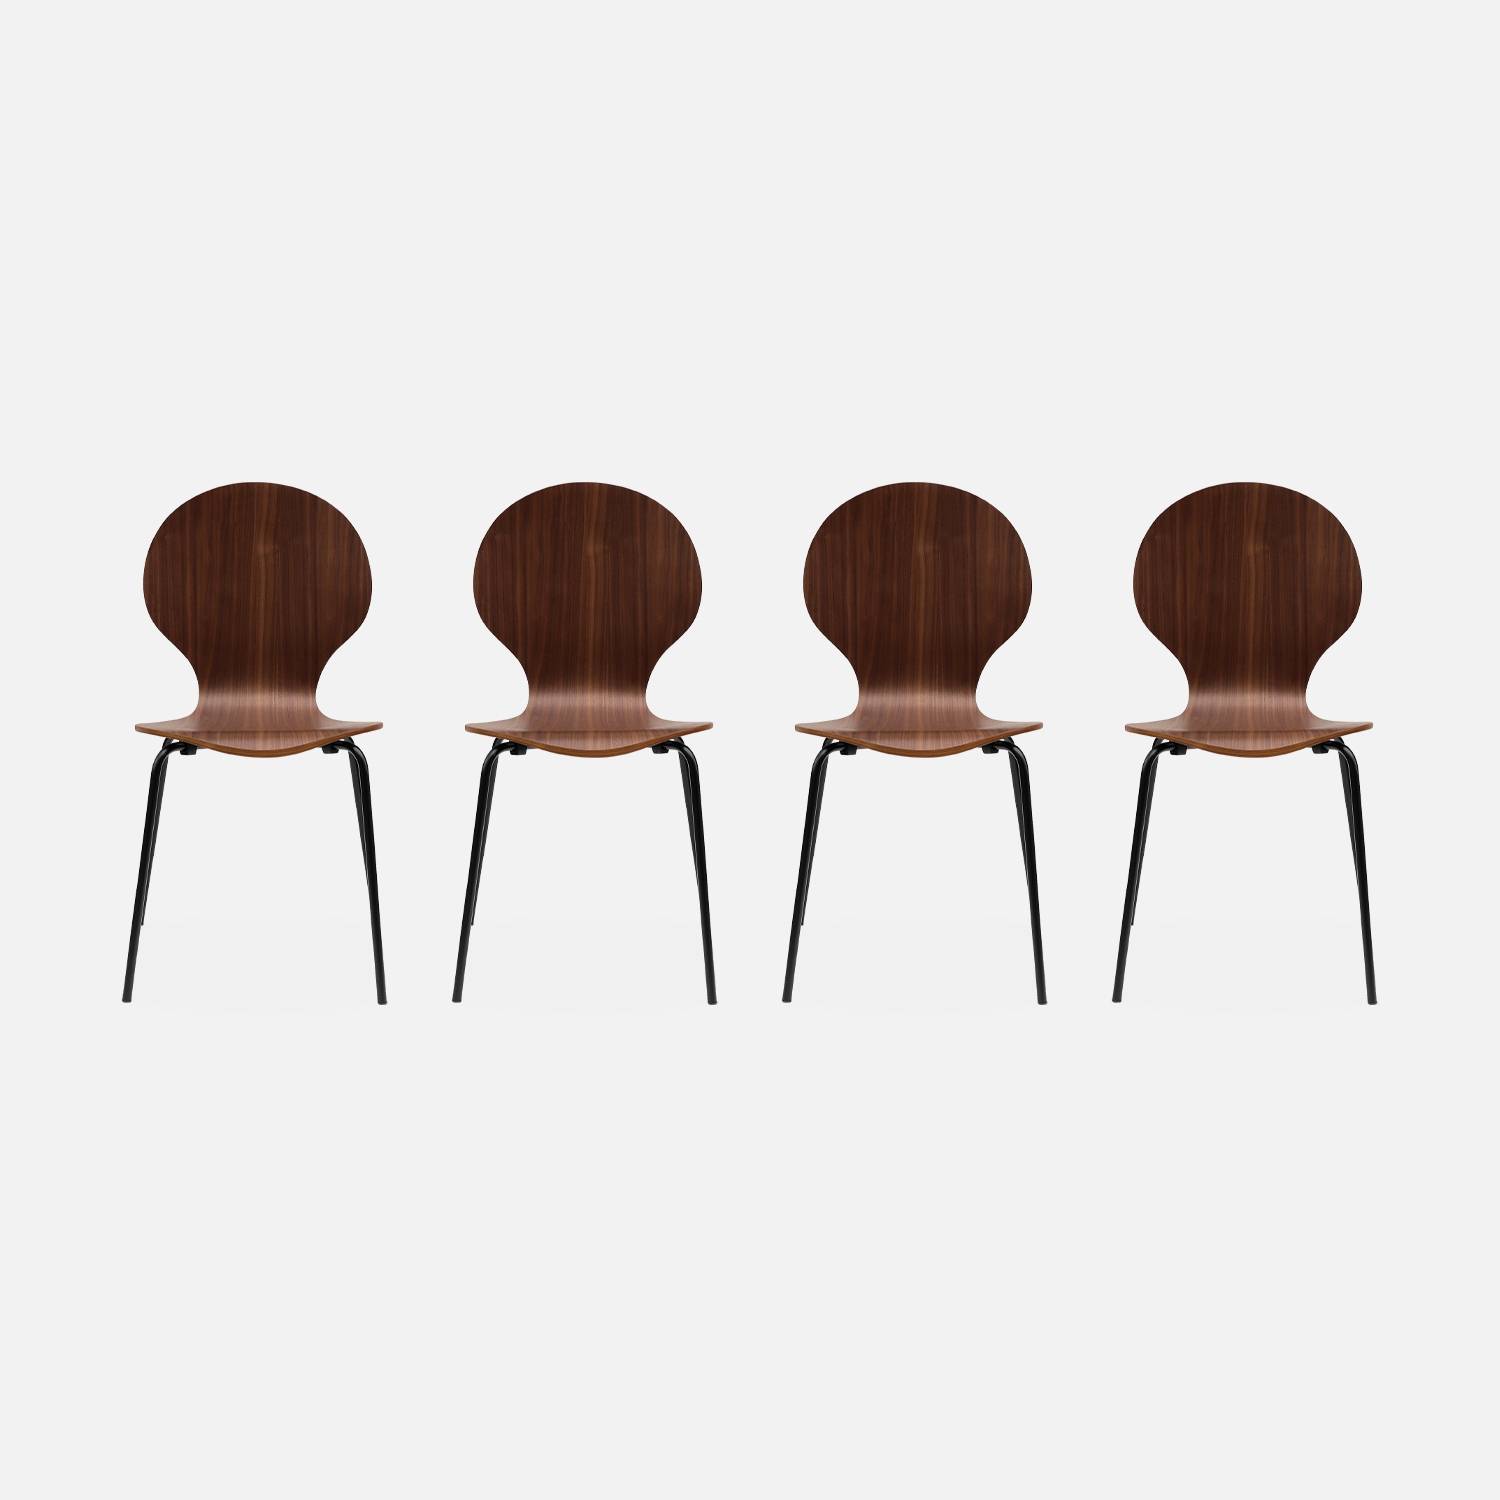 Set of 4 stackable Retro Chairs, Wood and Plywood, brown, L43xW48xH87cm | sweeek